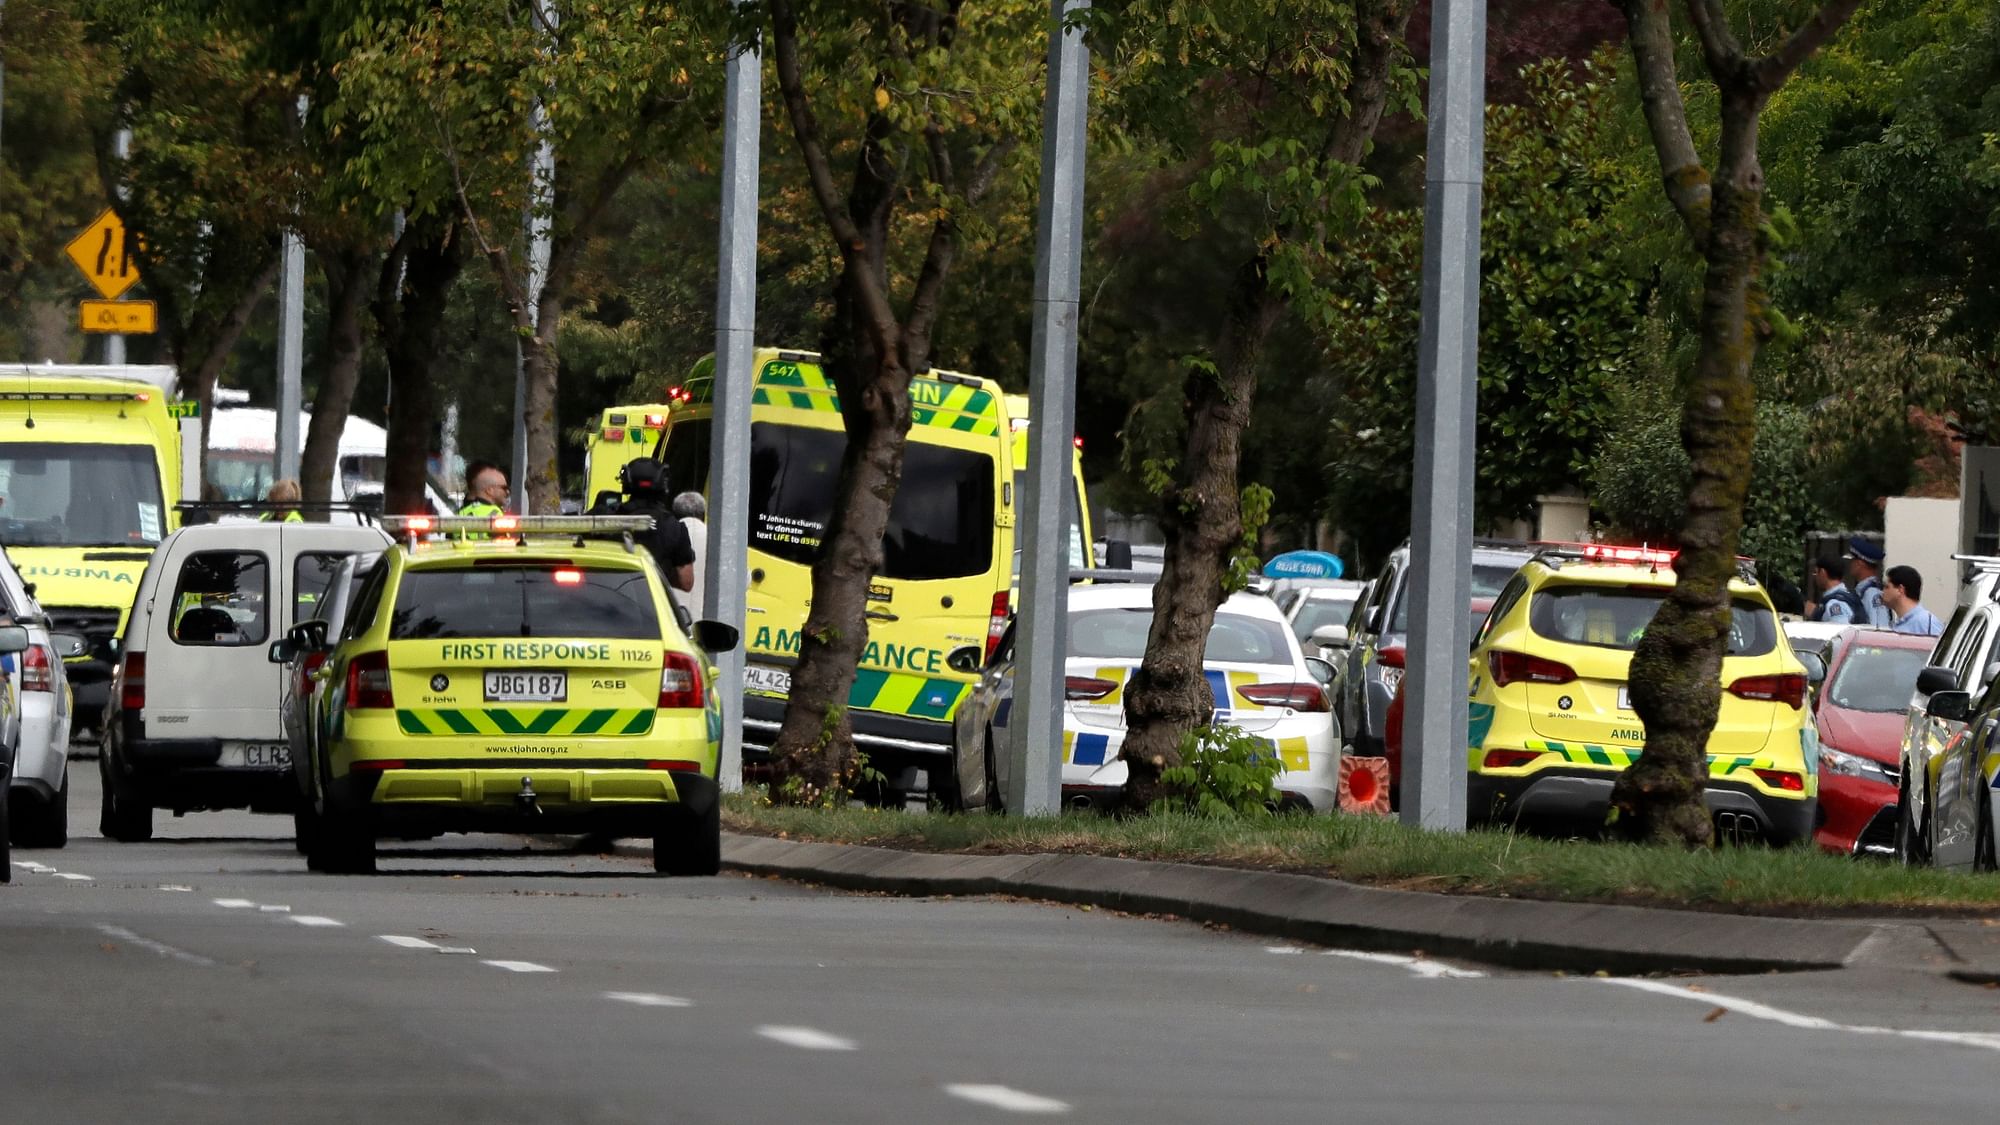 Members of the Bangladesh cricket team safely escaped from a mosque that was targeted by an active shooter in Christchurch.&nbsp;